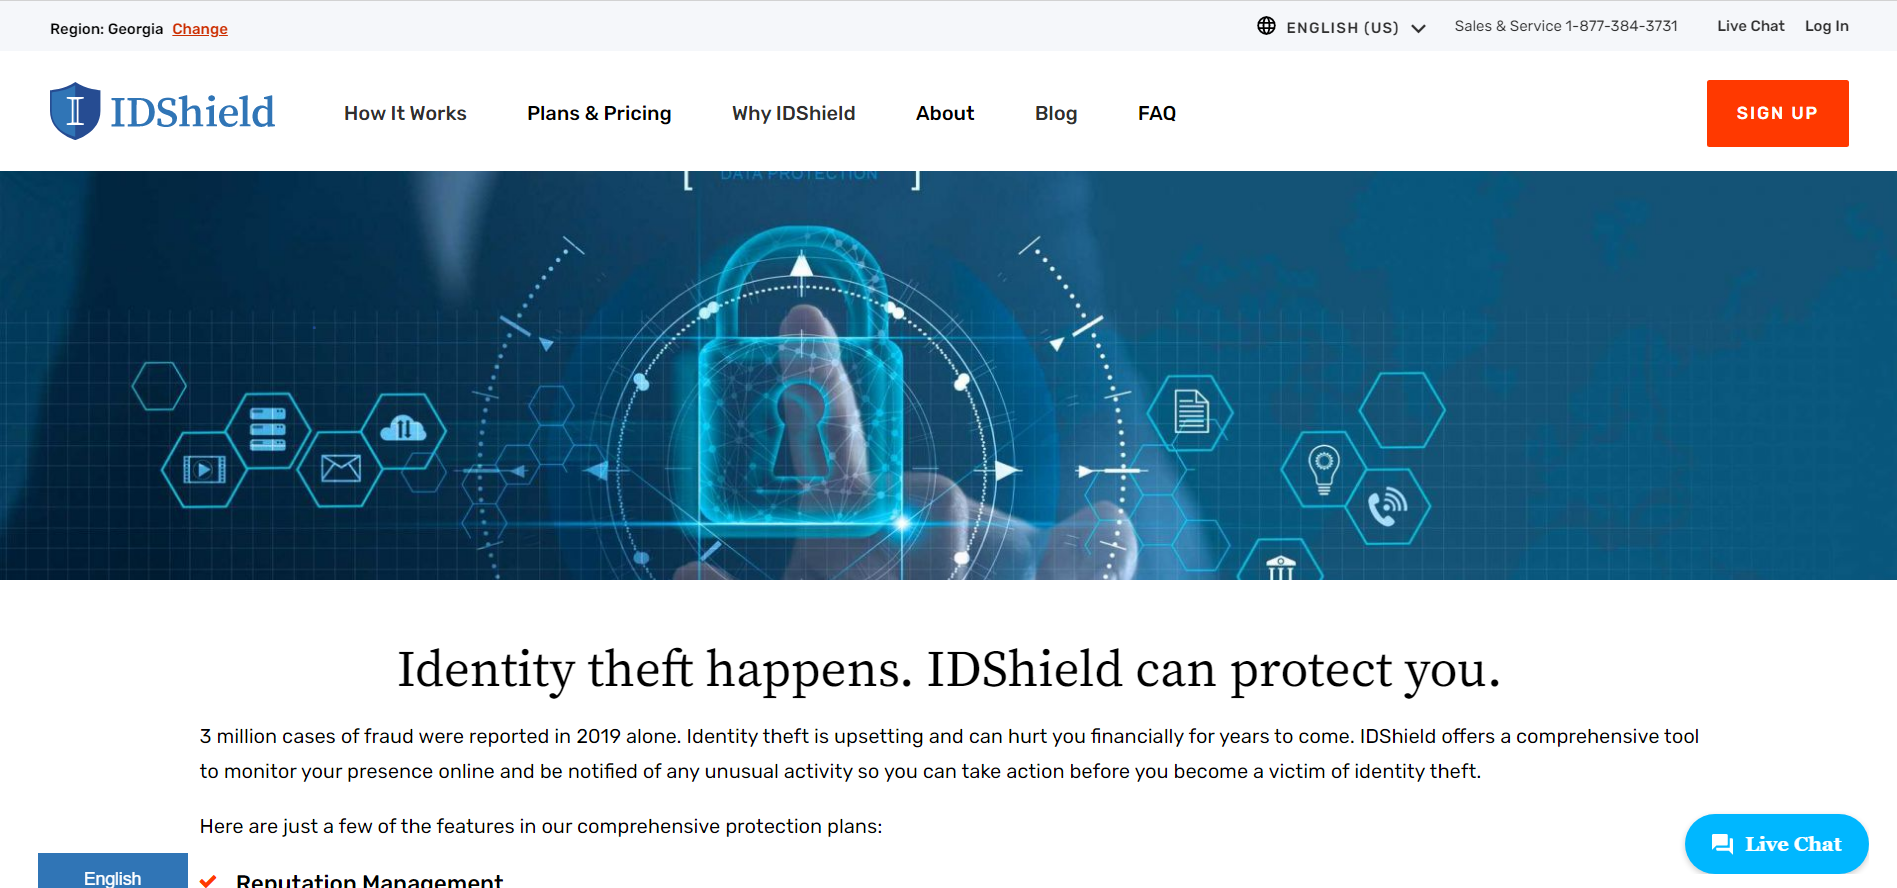 A screenshot of the IDShield website homepage.